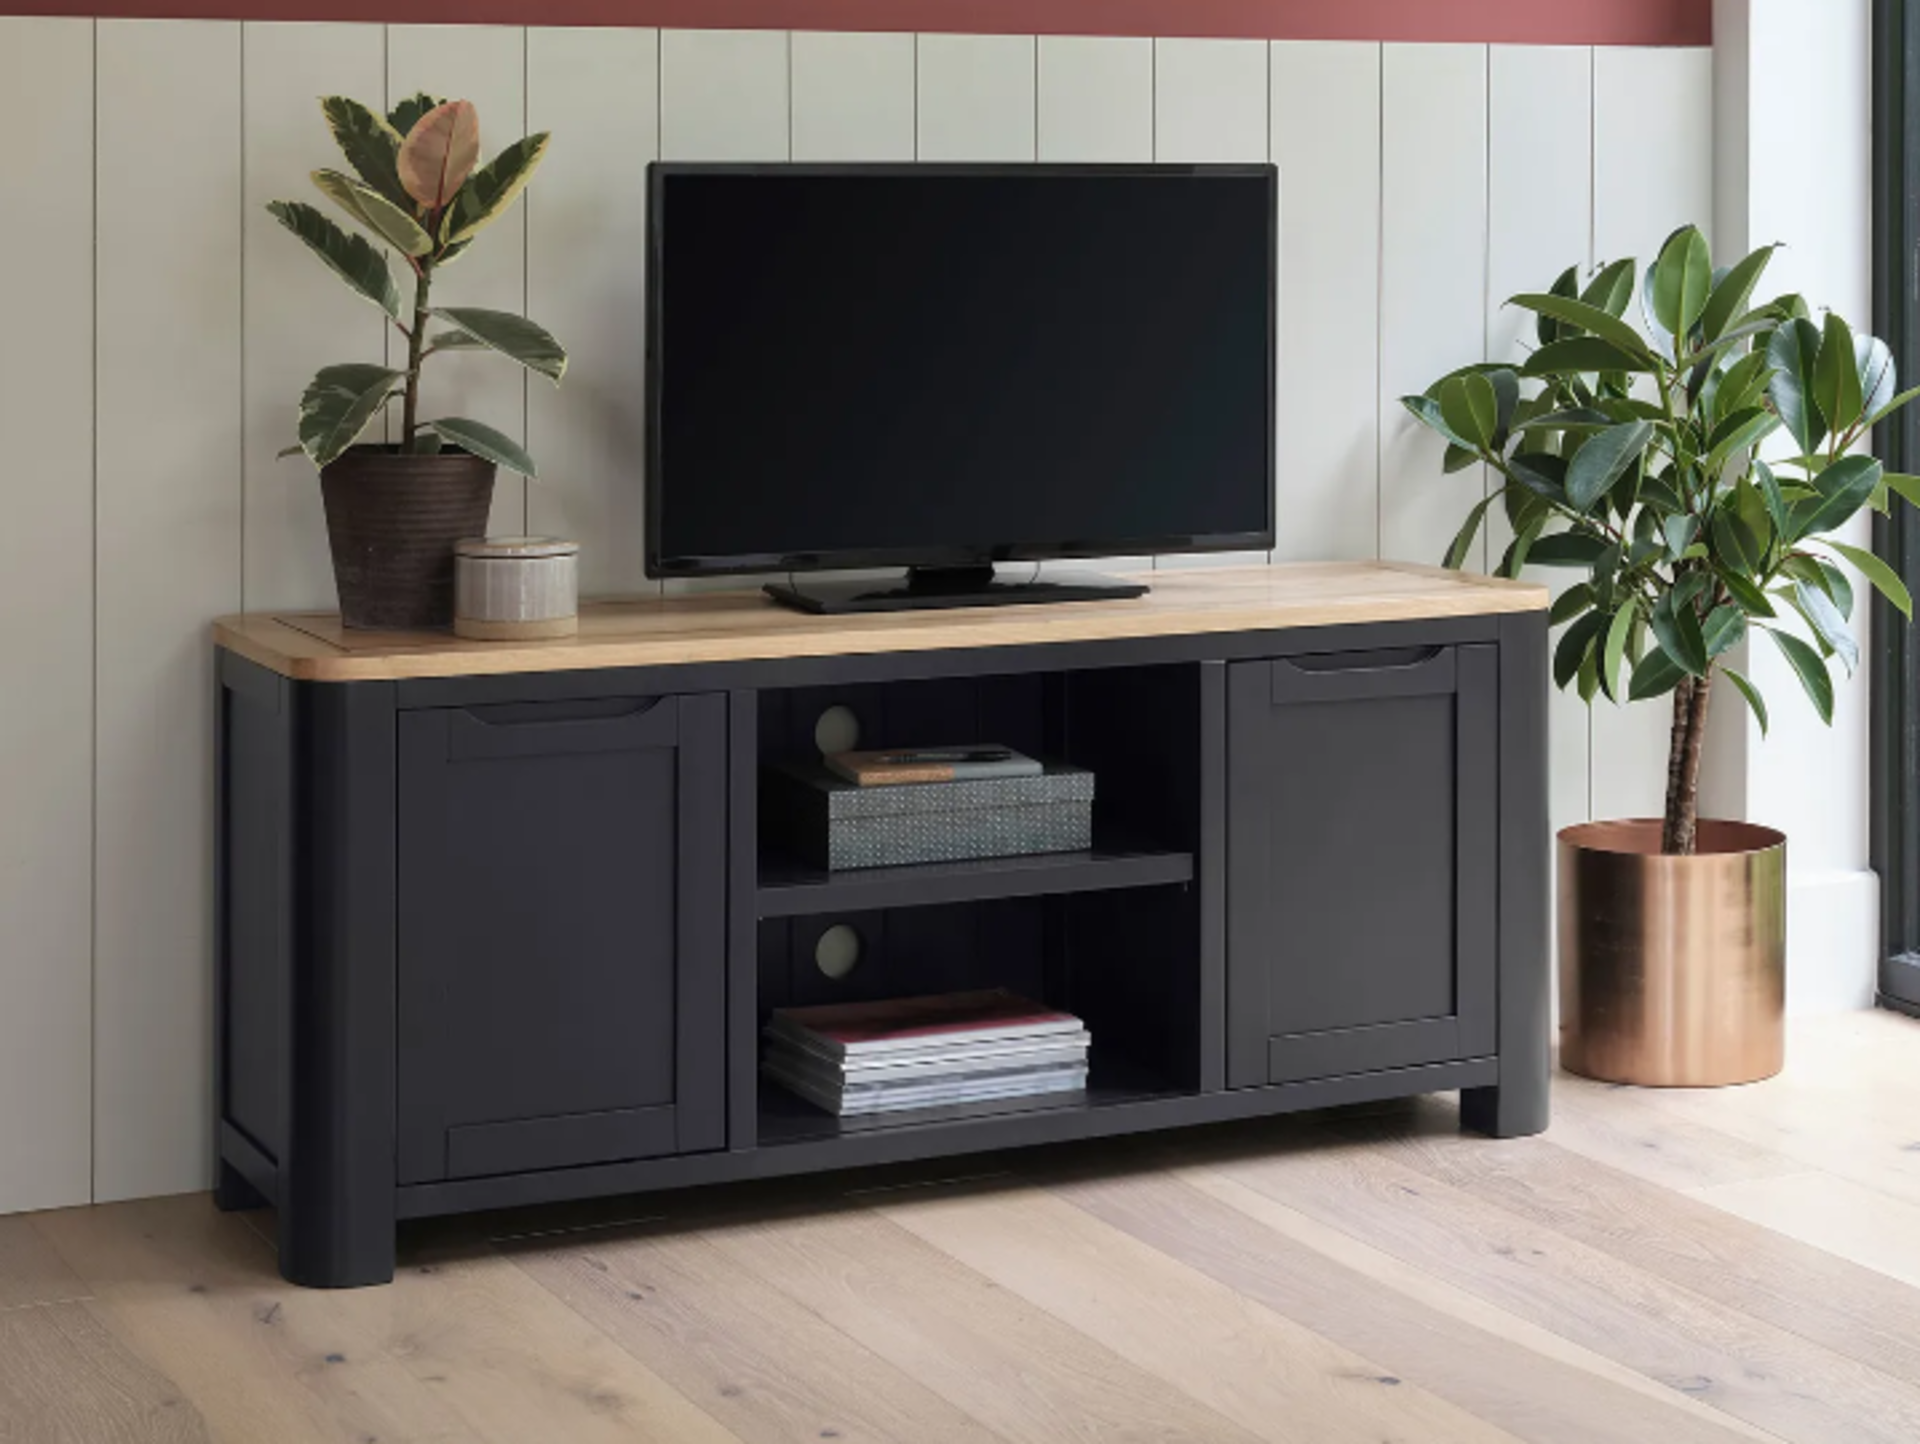 GROVE Natural Oak & Dark Grey Paint Large TV Unit. RRP £539.99. Strong, modern design with cool